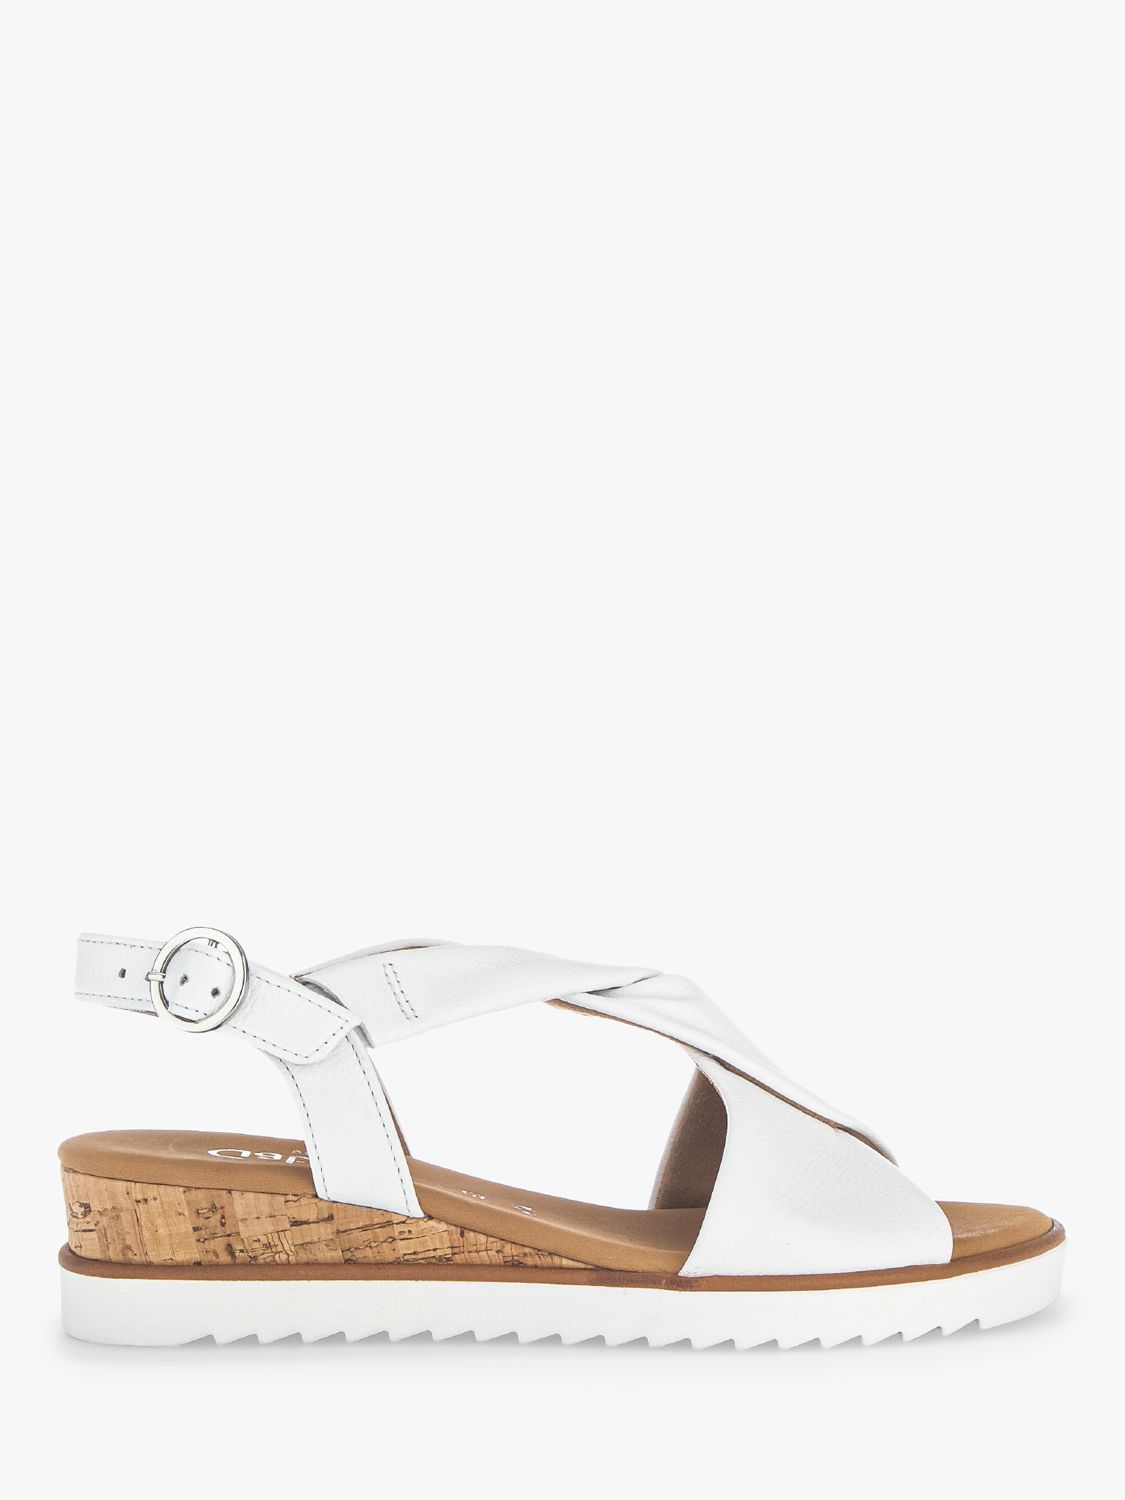 Gabor Rich Wide Fit Leather Wedge Heel Sandals, at John Lewis & Partners